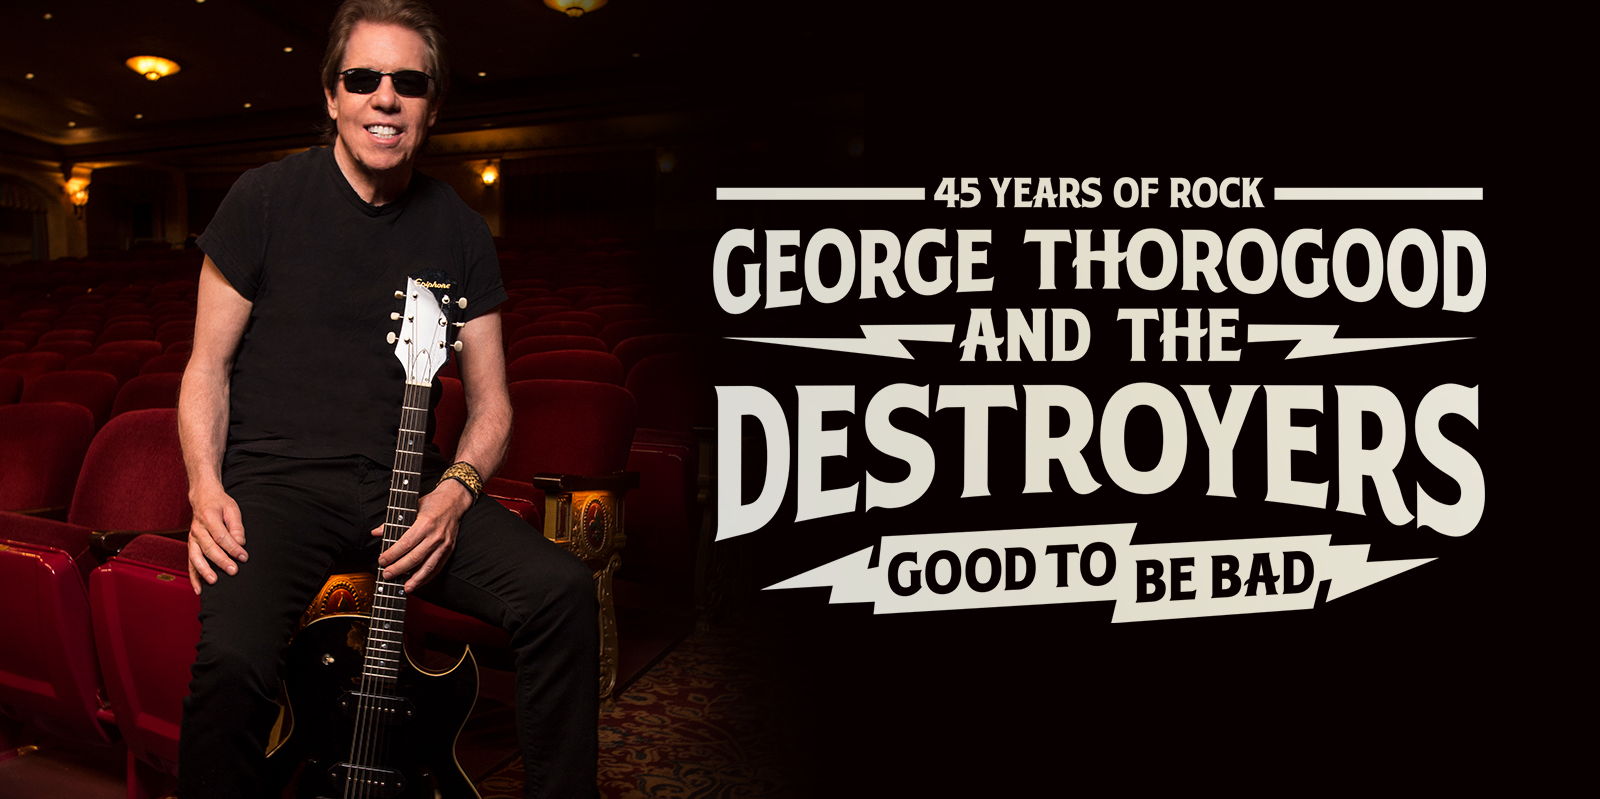 George Thorogood and the Destroyers promotional image